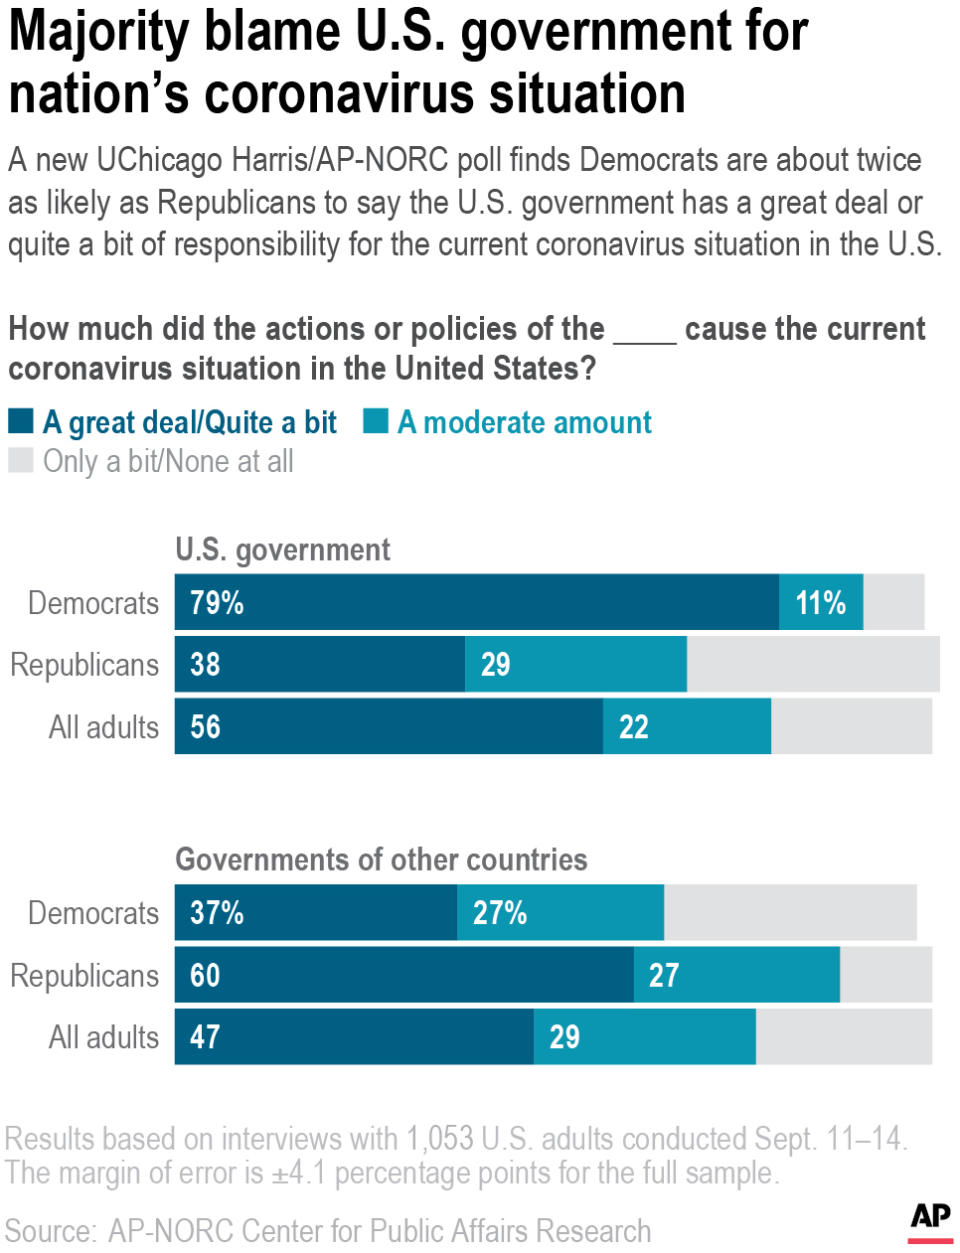 A new UChicago Harris/AP-NORC poll finds Democrats are about twice as likely as Republicans to say the U.S. government has a great deal or quite a bit of responsibility for the current coronavirus situation in the U.S.